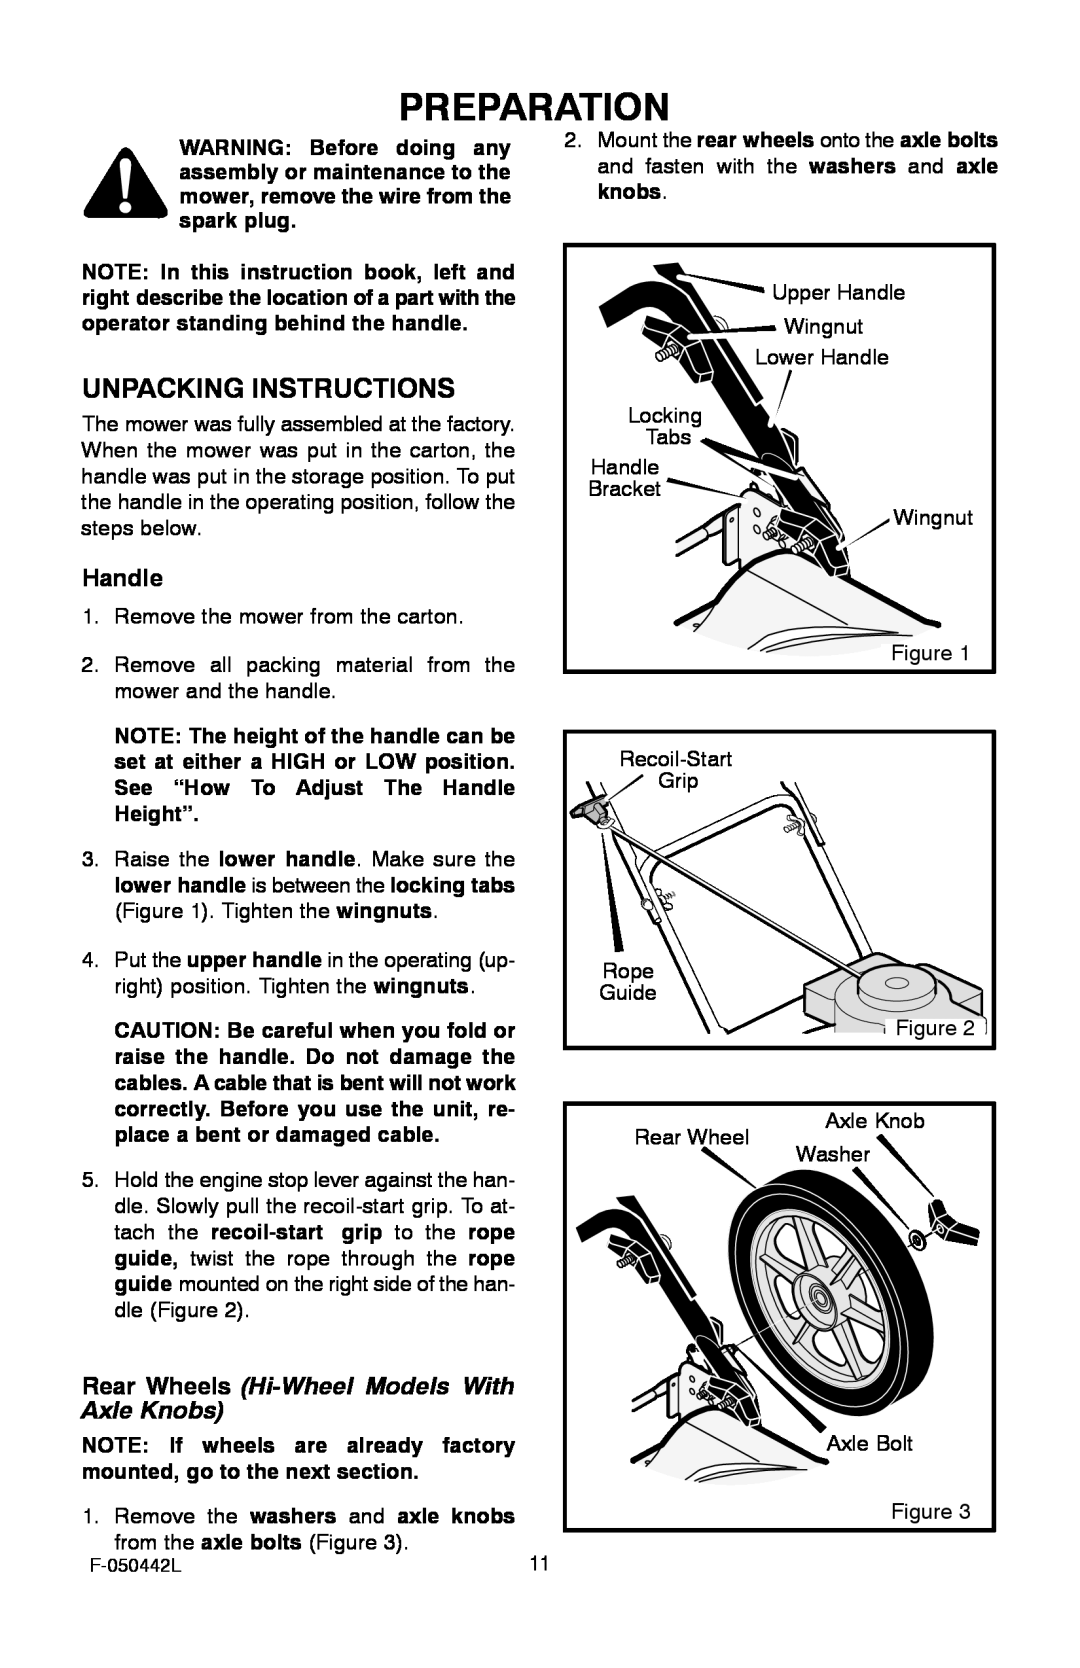 Murray 22" Front Drive manual Preparation, Unpacking Instructions, Rear Wheels Hi-Wheel Models With Axle Knobs 